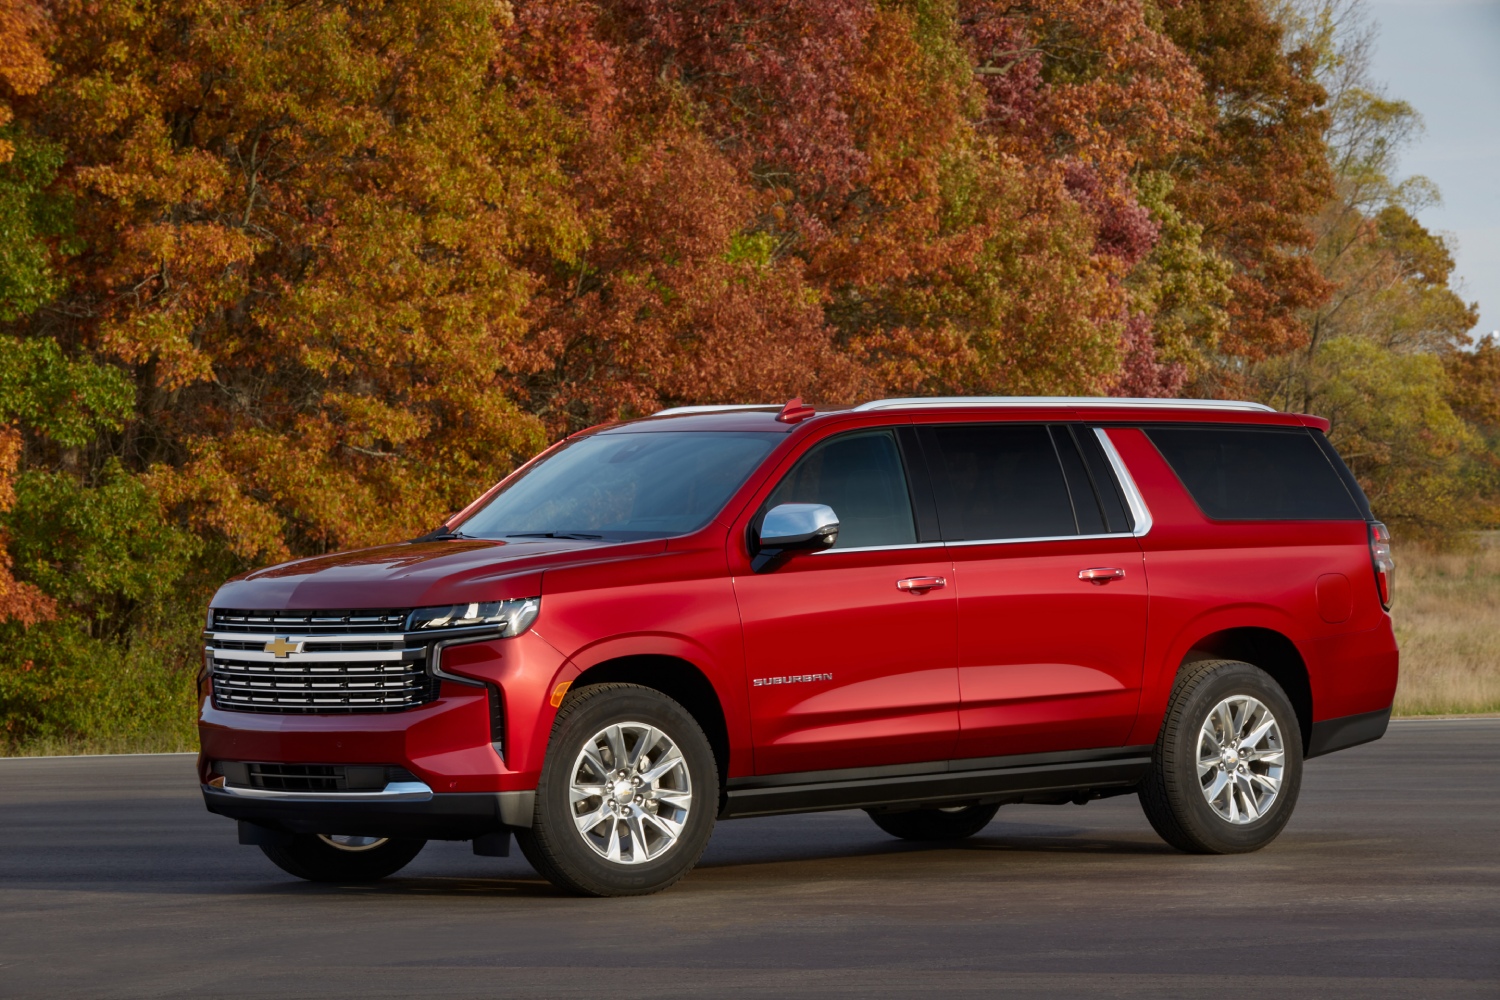 The best large SUVs include the 2022 Chevrolet Suburban